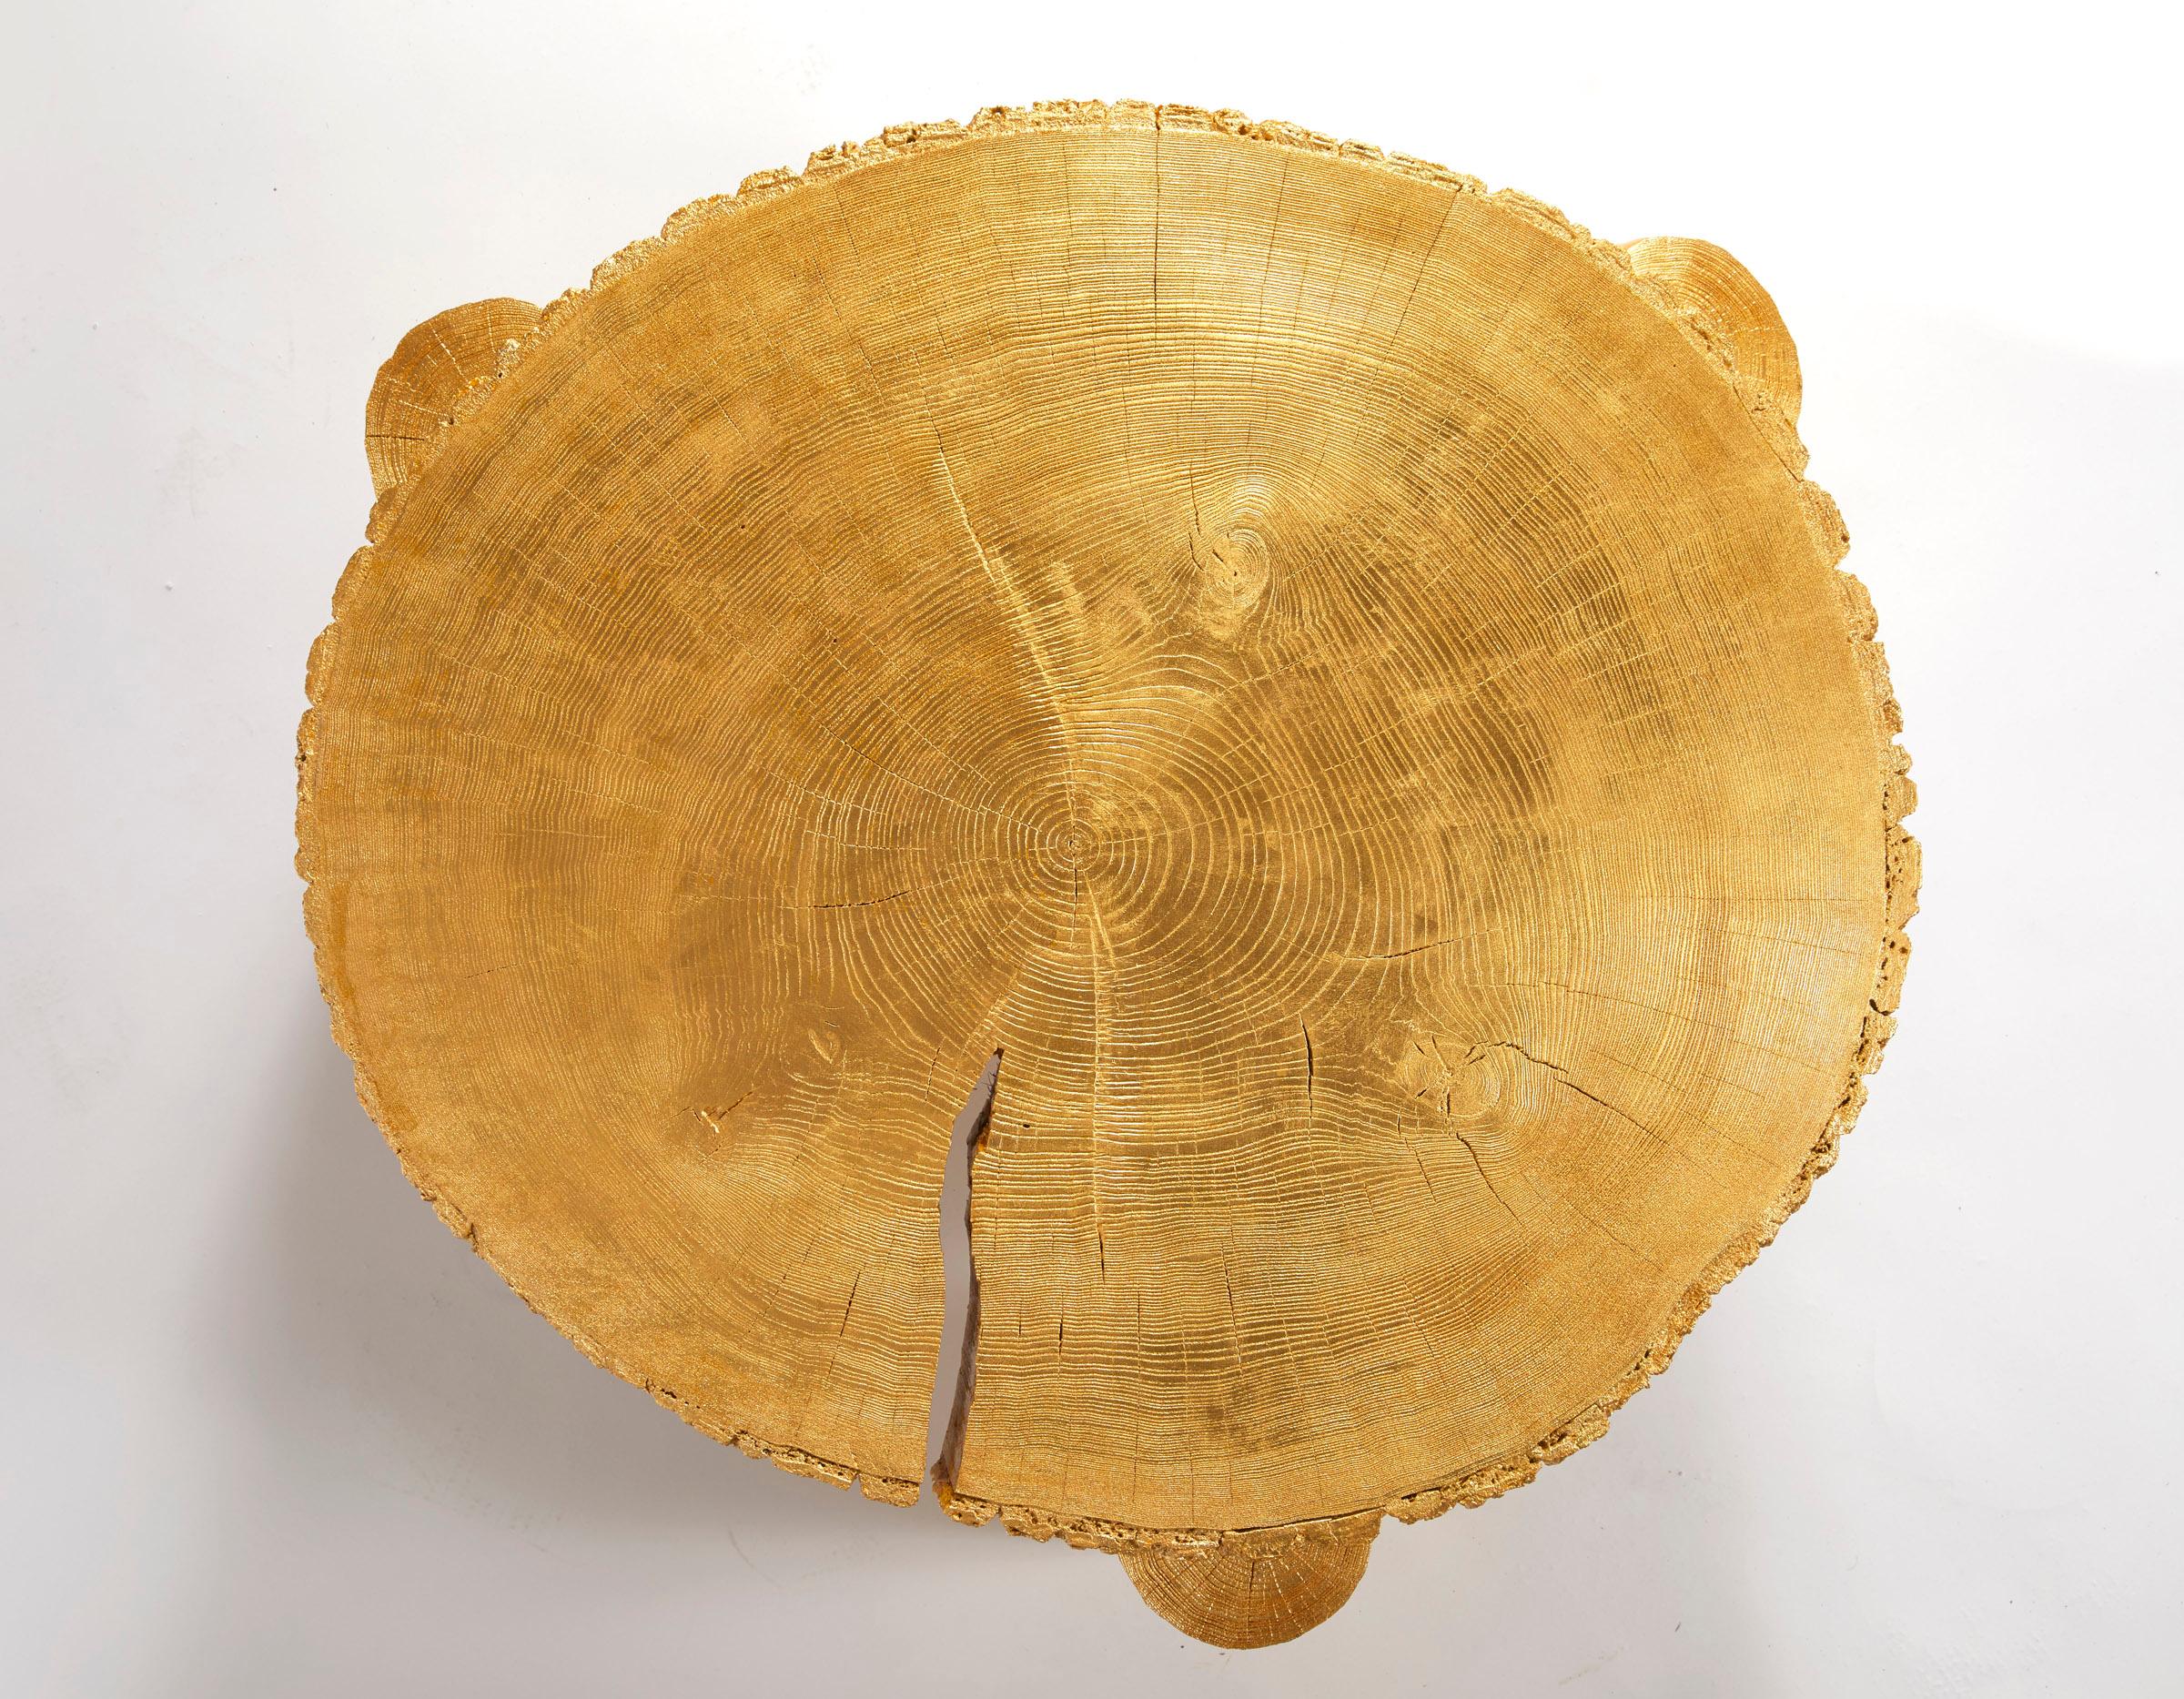 COFFEE TABLE
Cat-Berro Edition 2019
140 years old Sequoia slice. Golden leaves.
O 75cm. H35cm. 
One off piece.

Pricing does not include sales tax (French VAT) if applicable.

